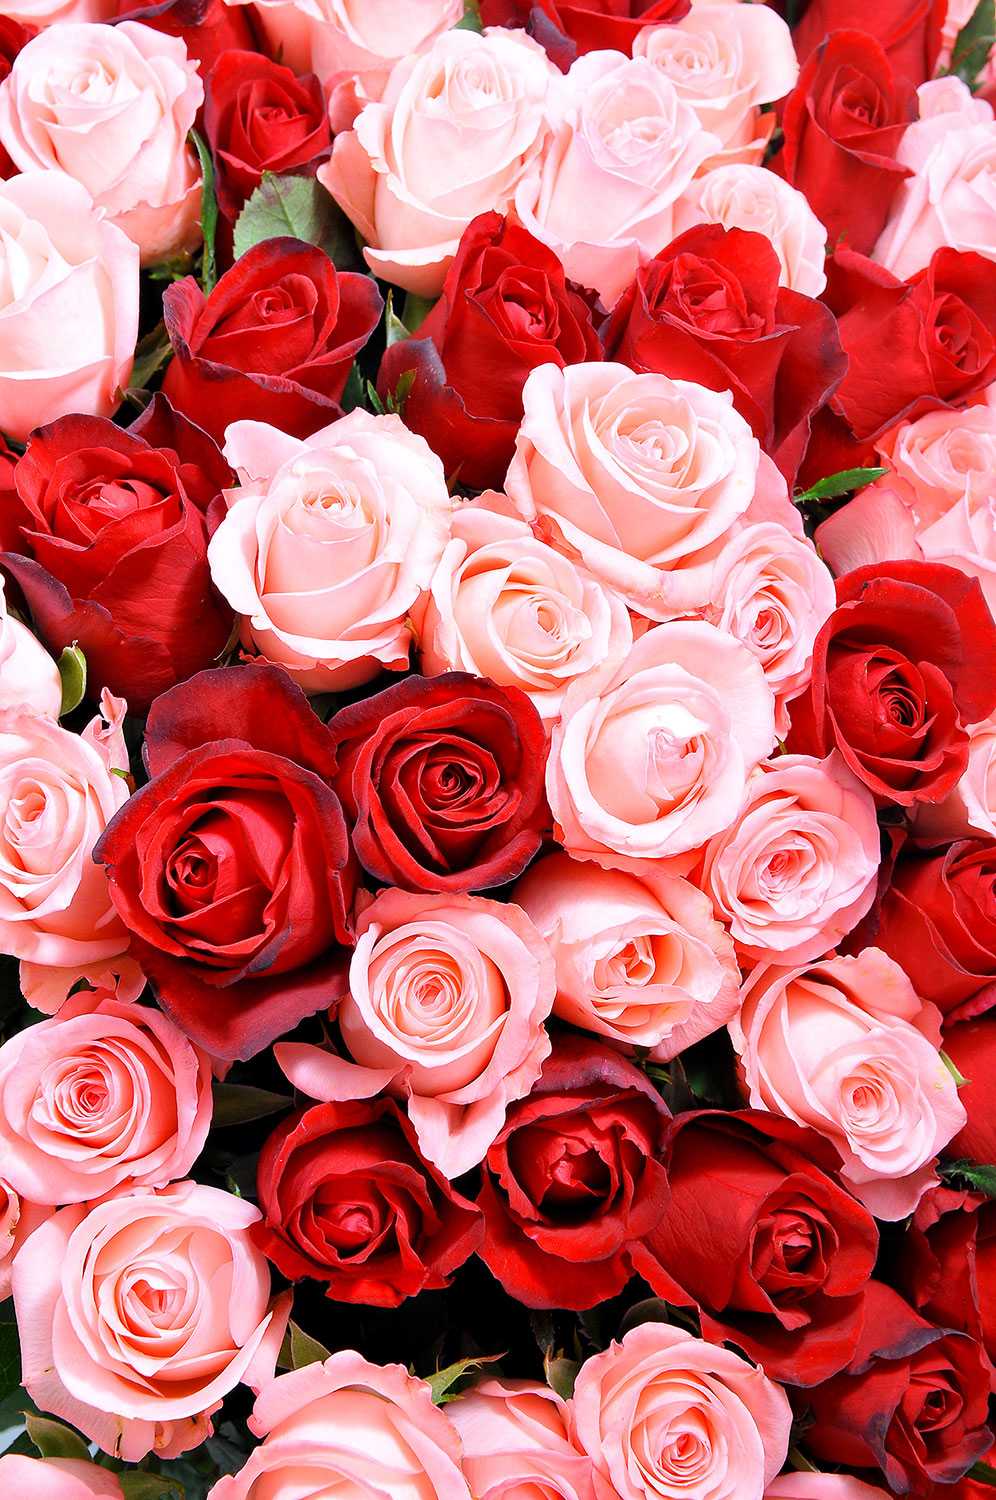 Red and White Roses Wallpapers - Top Free Red and White Roses